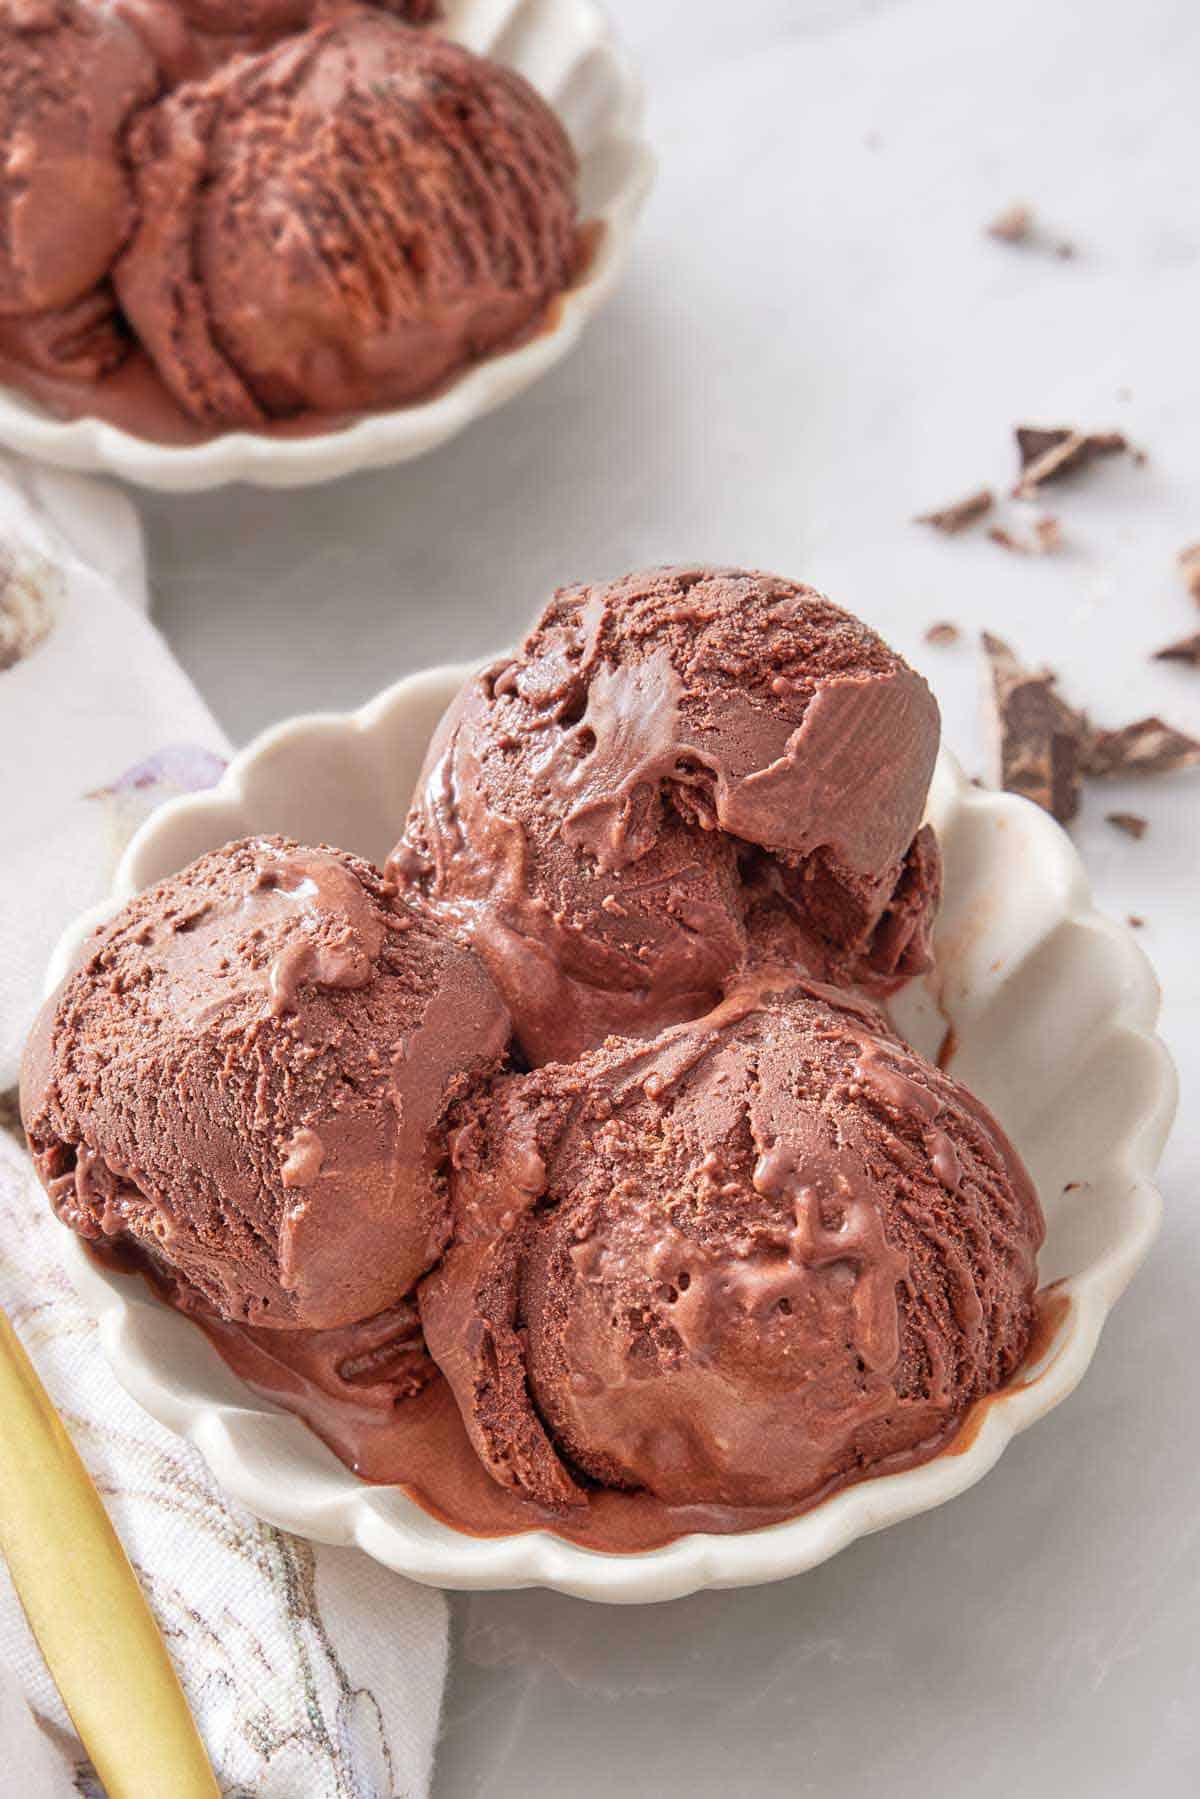 A bowl with three scoops of chocolate ice cream with another bowl in the background.